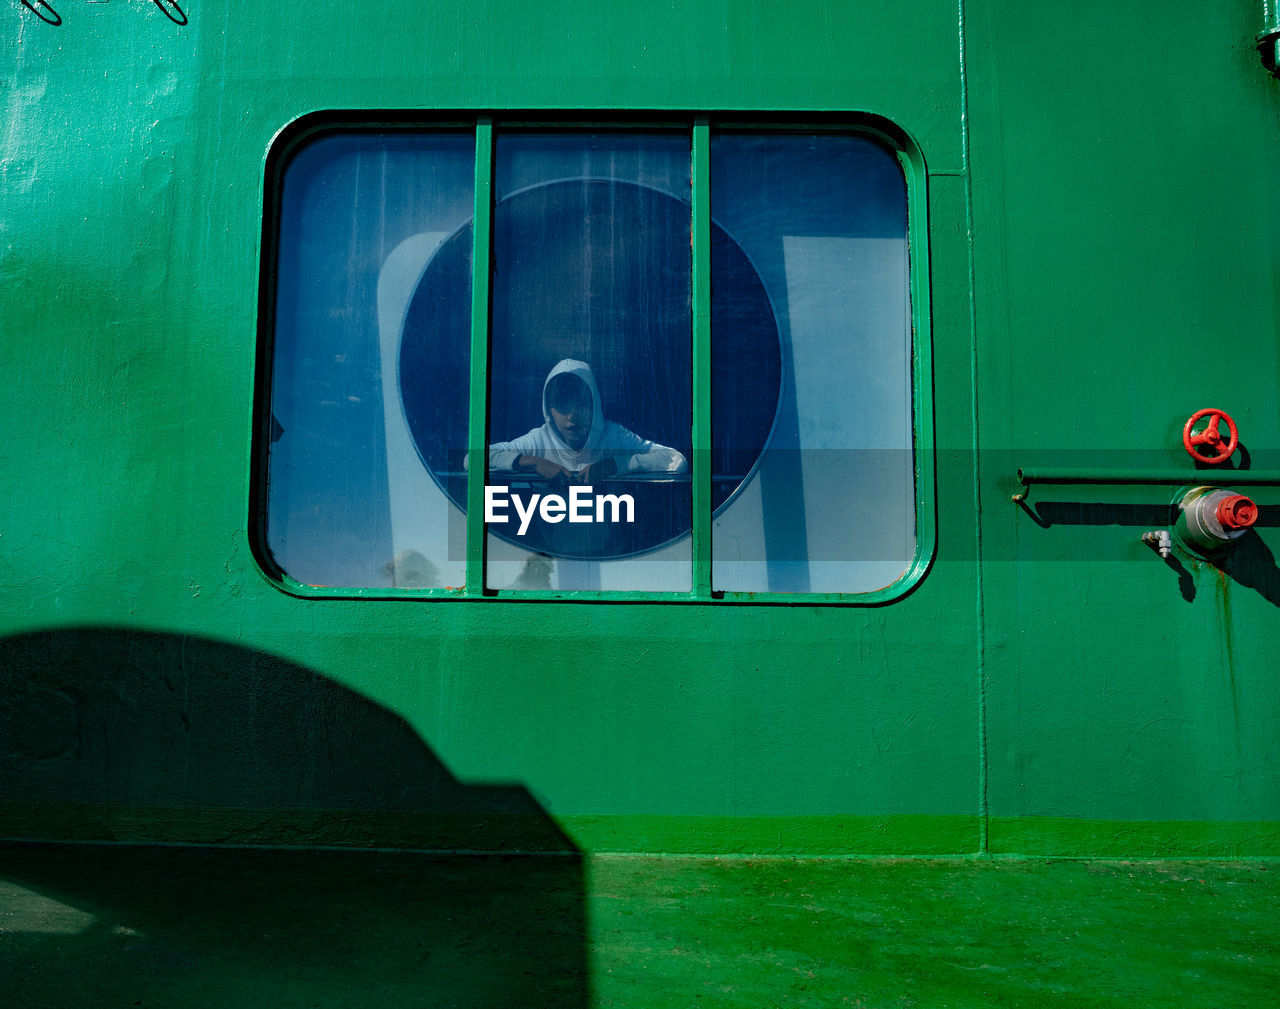 CLOSE-UP OF TRAIN WINDOW WITH CAR IN BACKGROUND